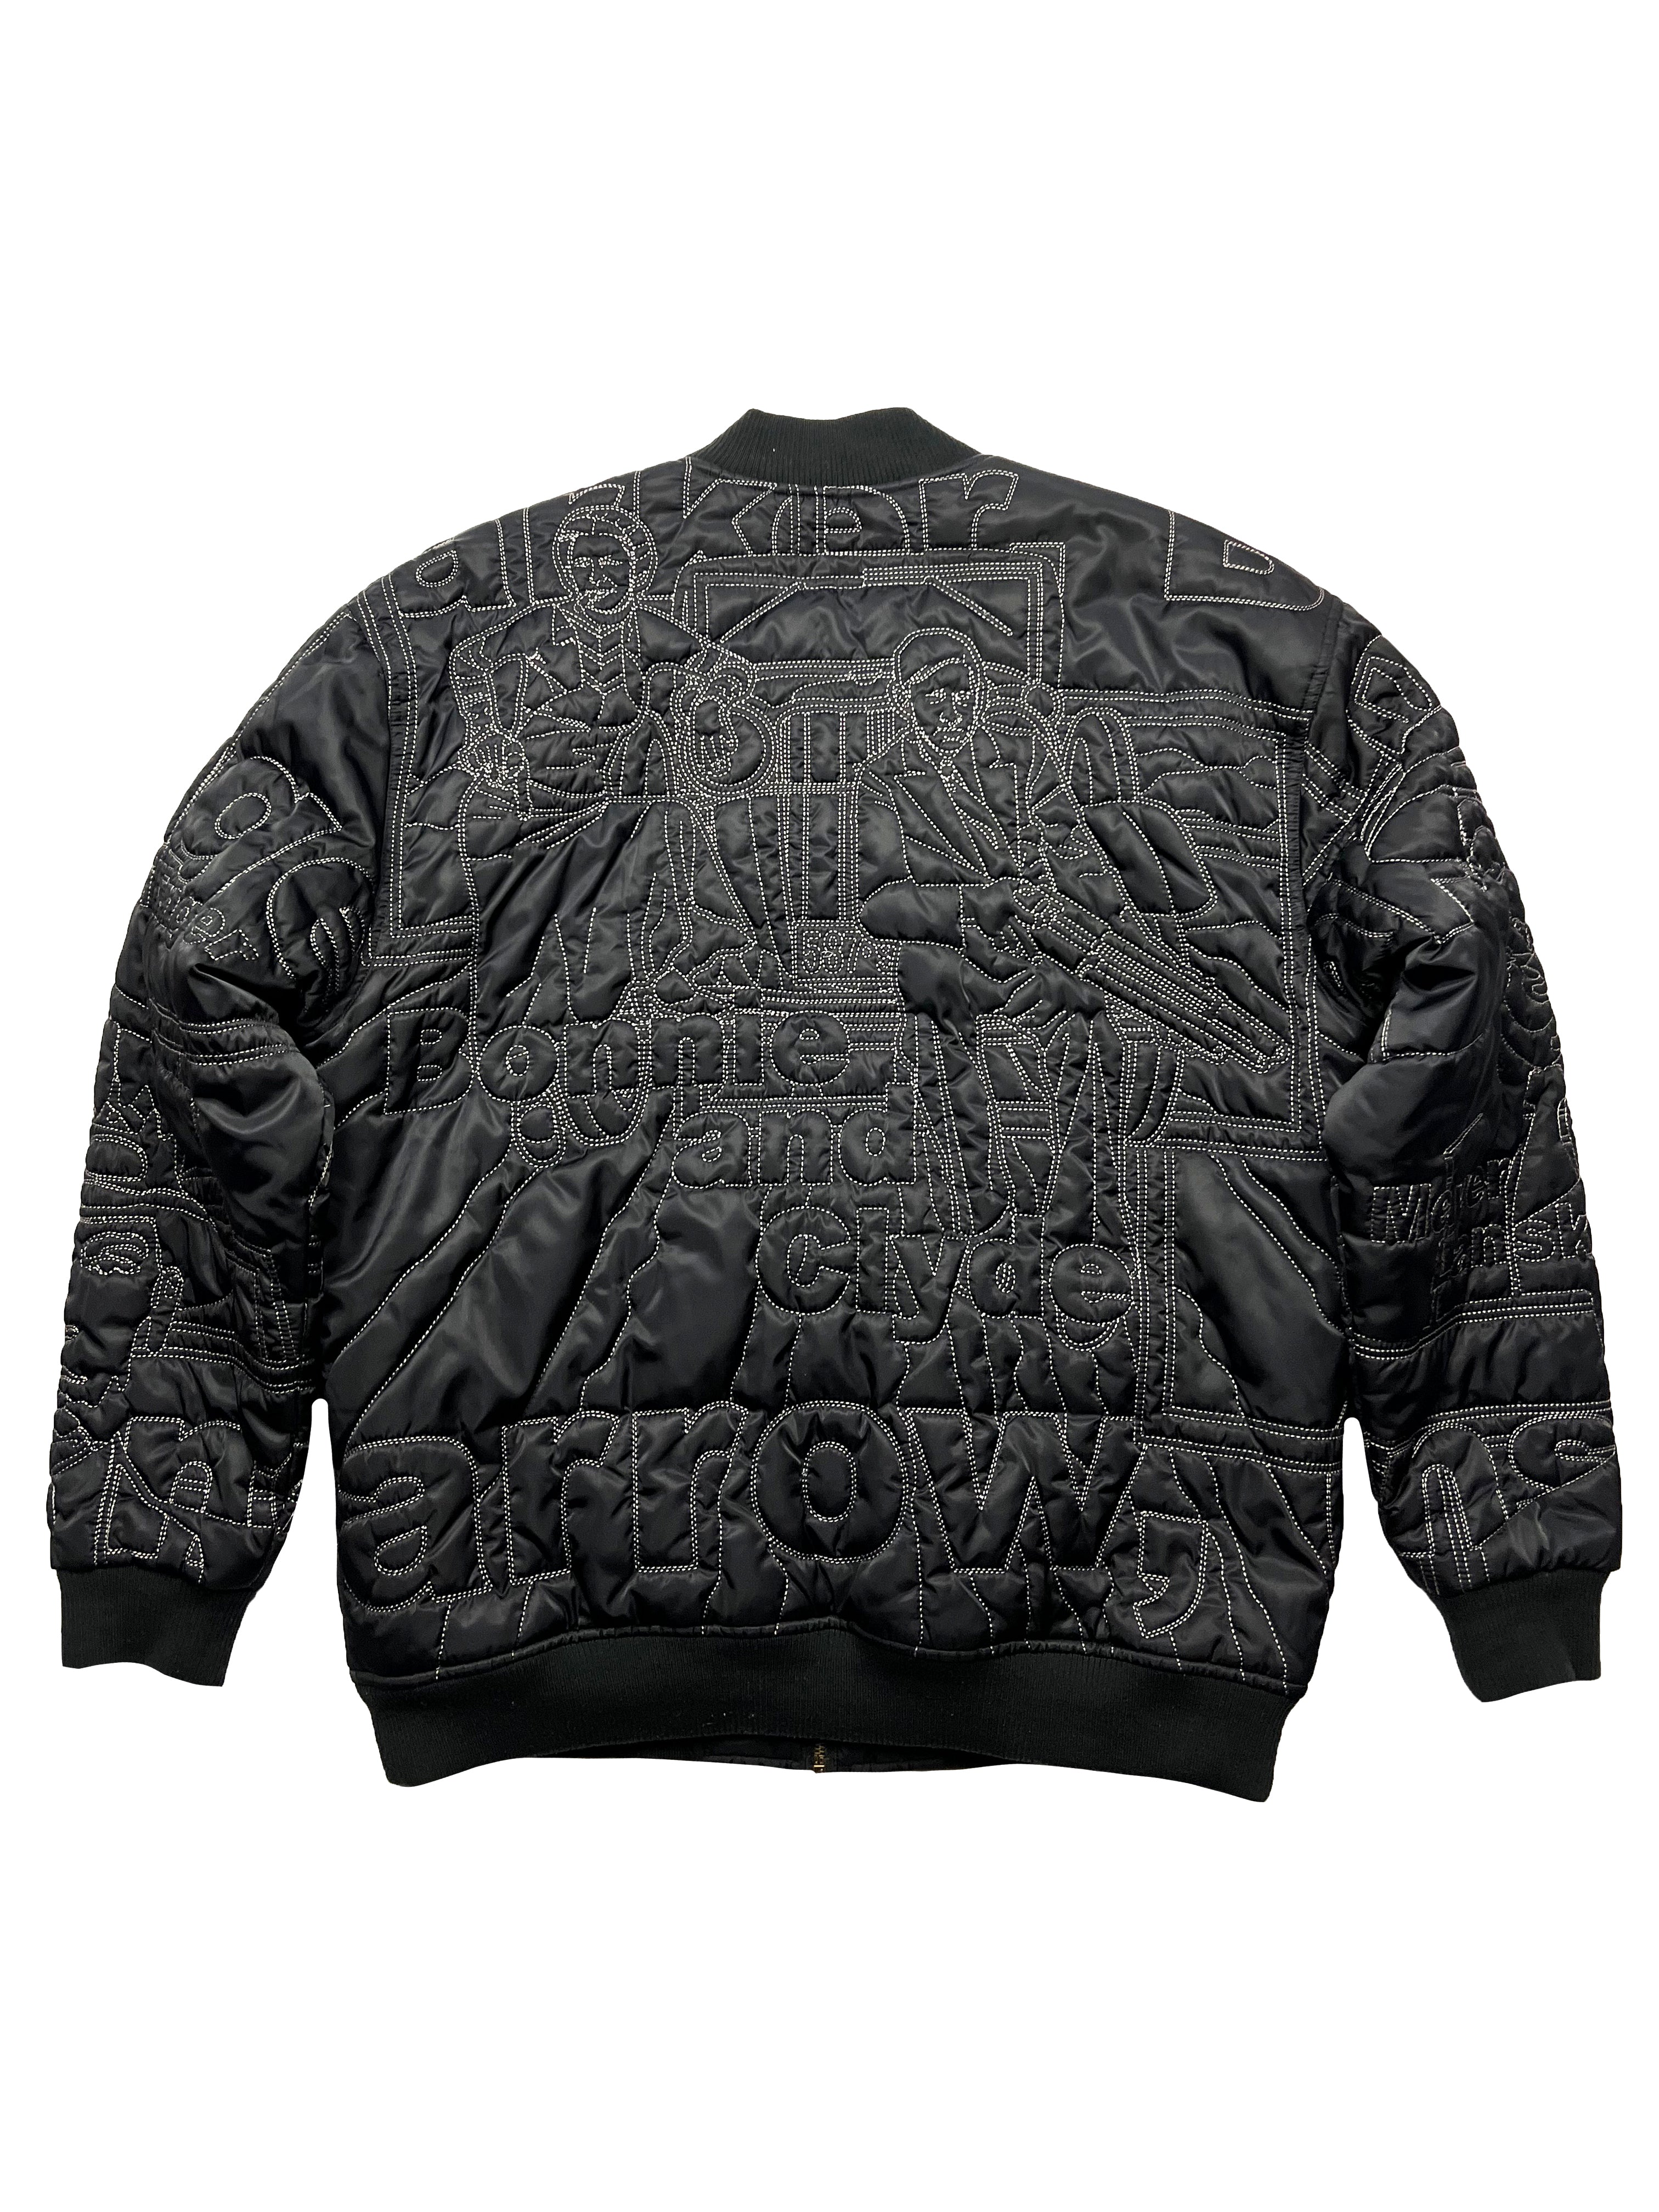 Pelle Pelle 'Gangsters' Embroidered Bomber Jacket 00's